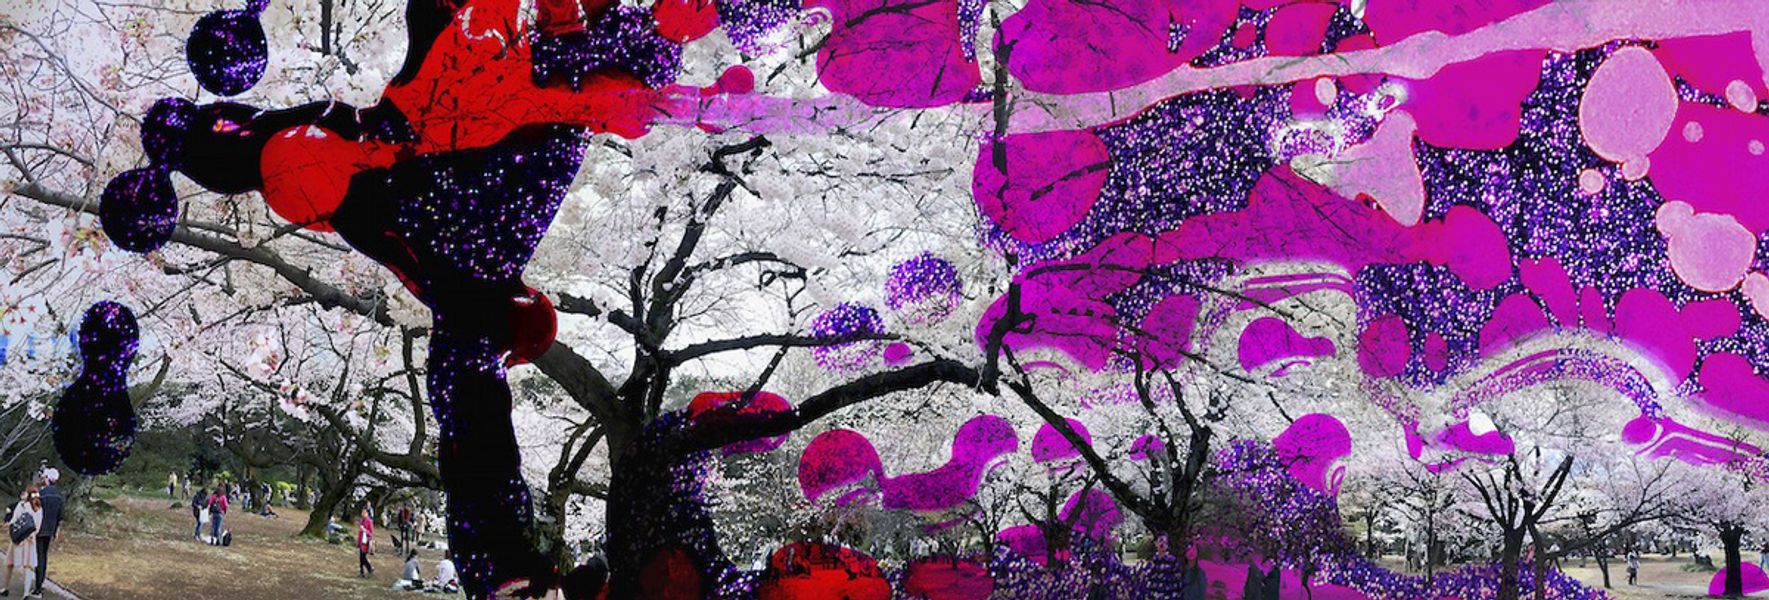 Delia Dickmann Photography Abstract White Cherry Blossom Trees with Lava Lamp Overlay in Red and Magenta